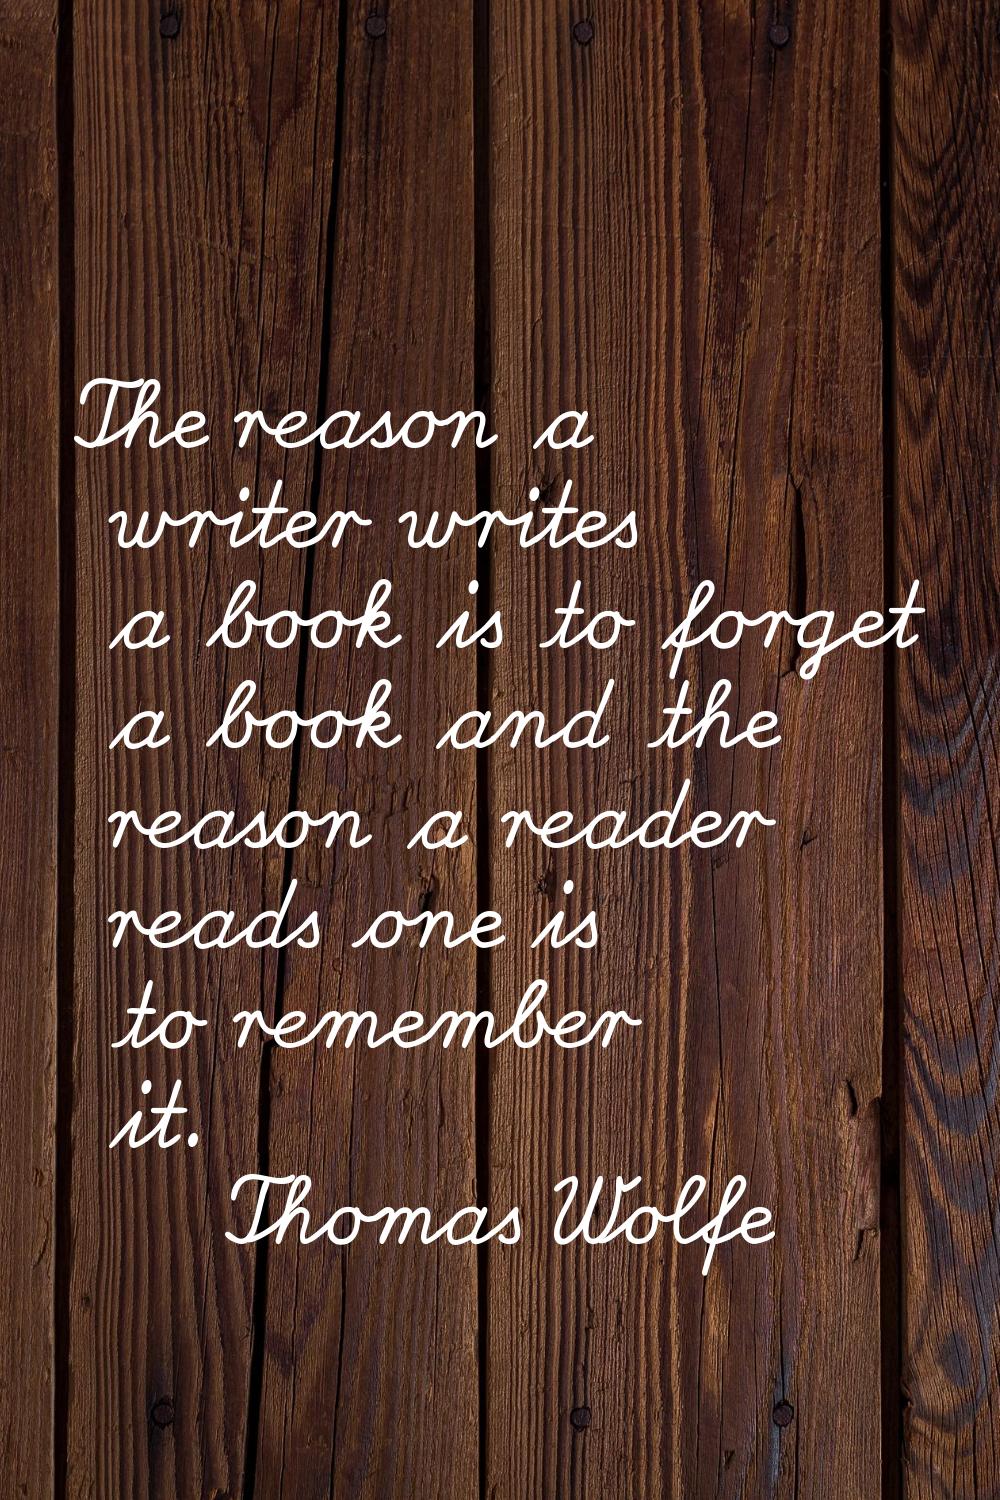 The reason a writer writes a book is to forget a book and the reason a reader reads one is to remem